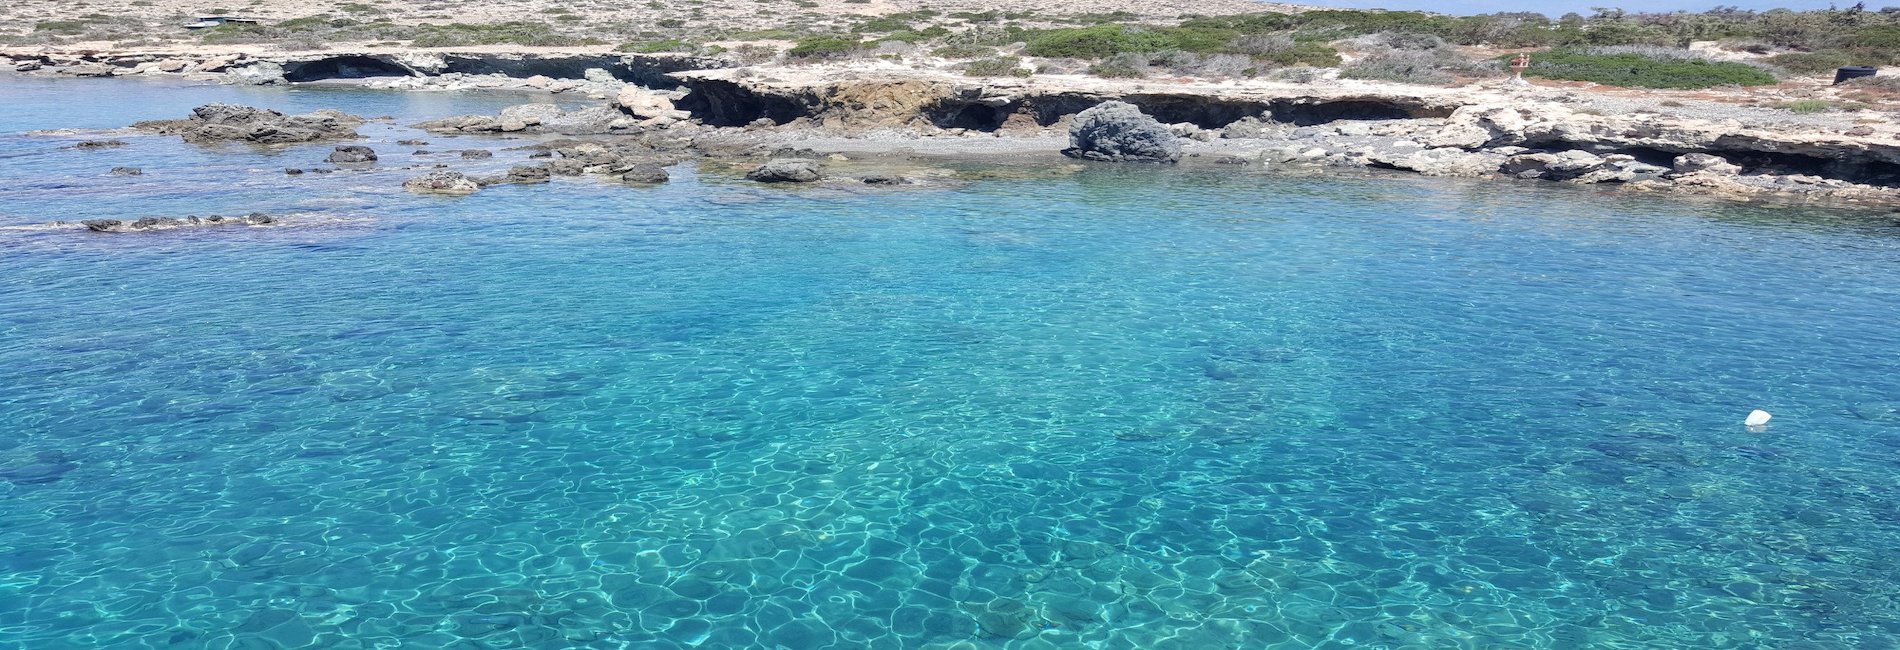 Day Trip to Chrissi Island from Ierapetra